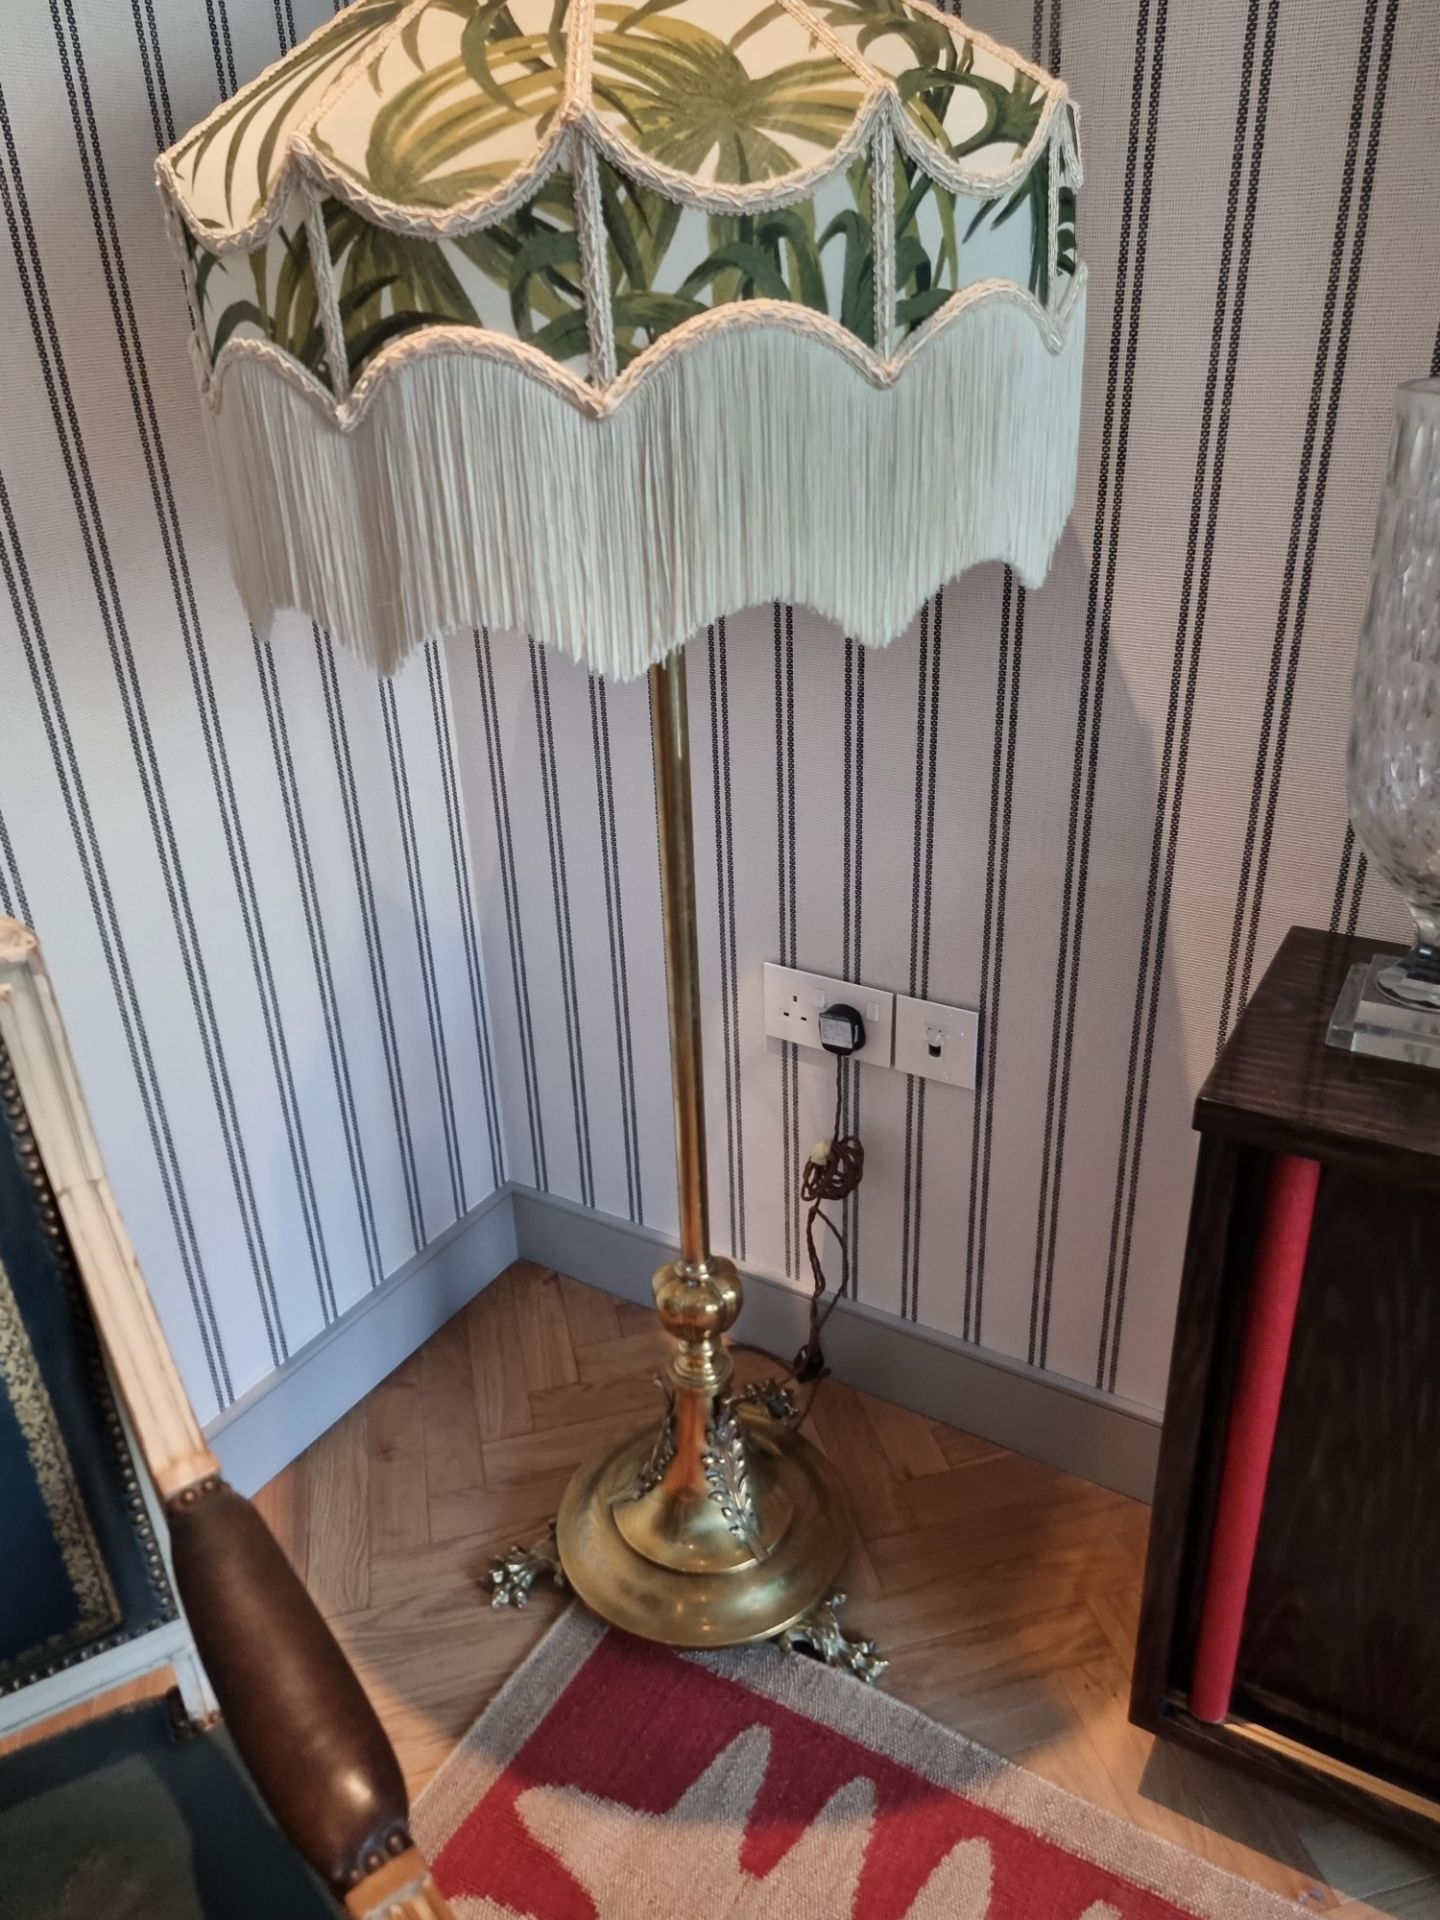 Edwardian Standard Lamp Elevate Your Space With An Exquisite Antique Brass Edwardian Standard - Image 2 of 4